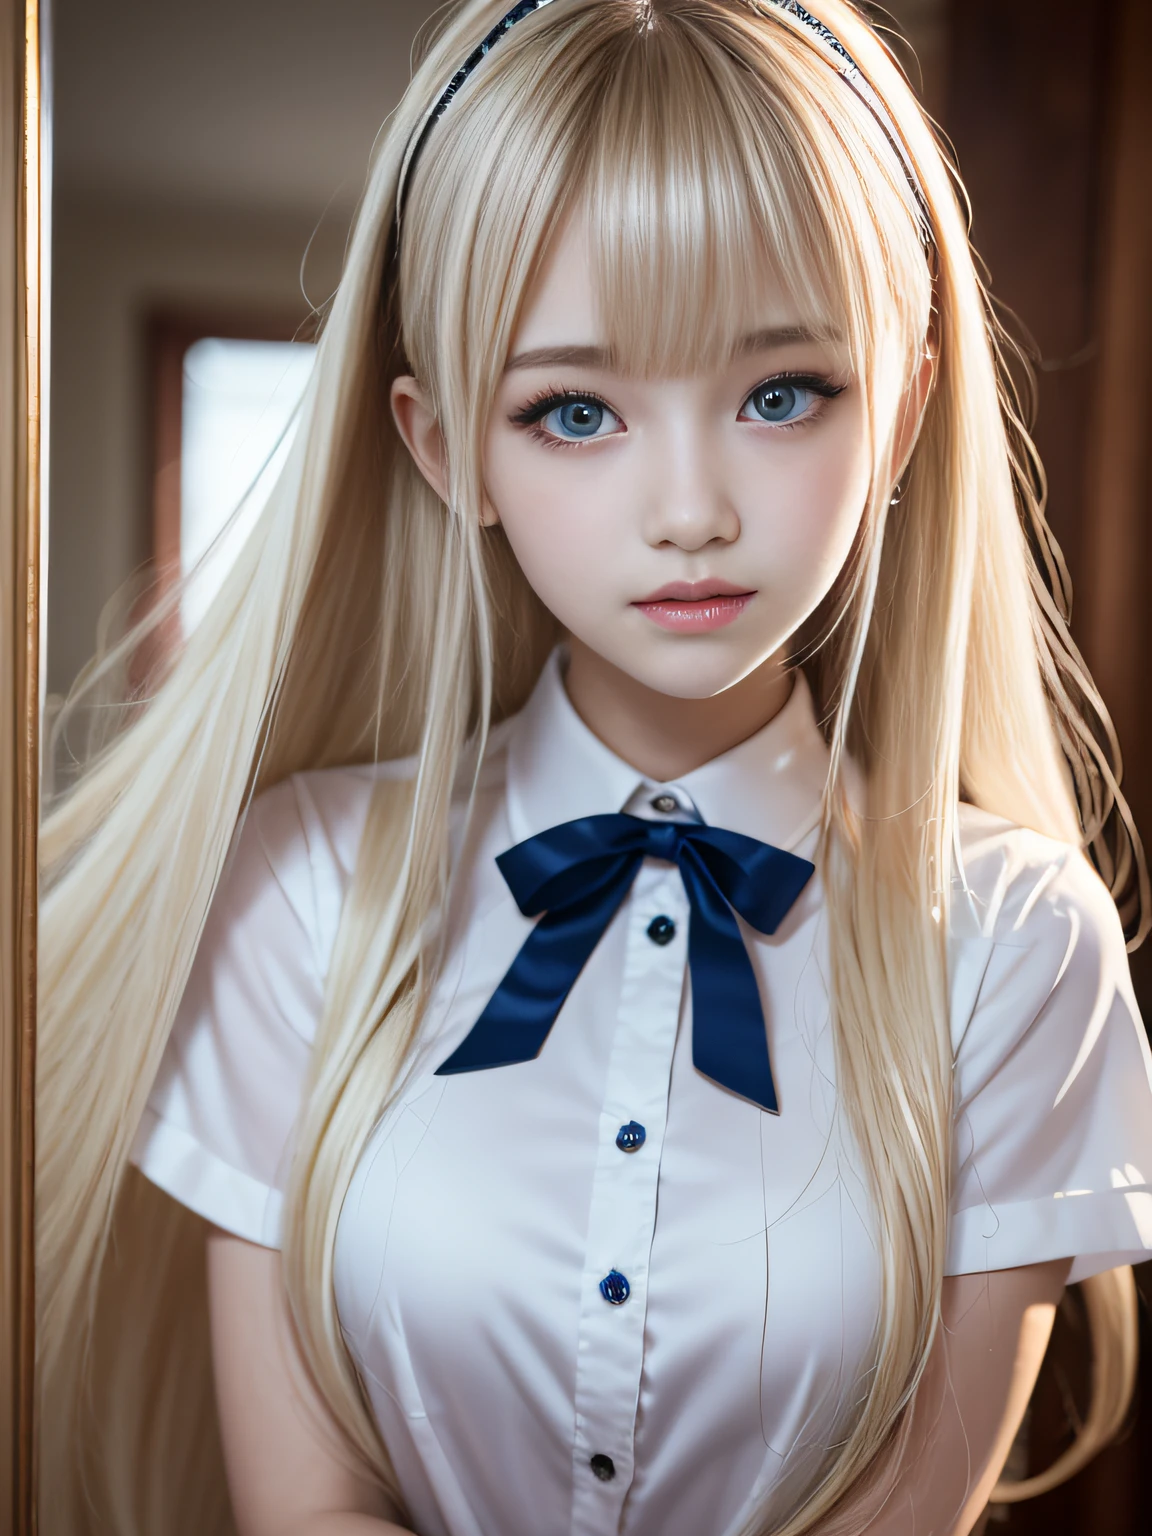 portlate、School Uniforms、bright expression、Young shiny shiny white shiny skin、Best Looks、Blonde reflected light、Platinum blonde hair with dazzling highlights、shiny light hair,、Super long silky straight hair、Beautiful bangs that shine、Glowing crystal clear attractive big blue eyes、Very beautiful nice cute 16 year old girl、Lush bust、